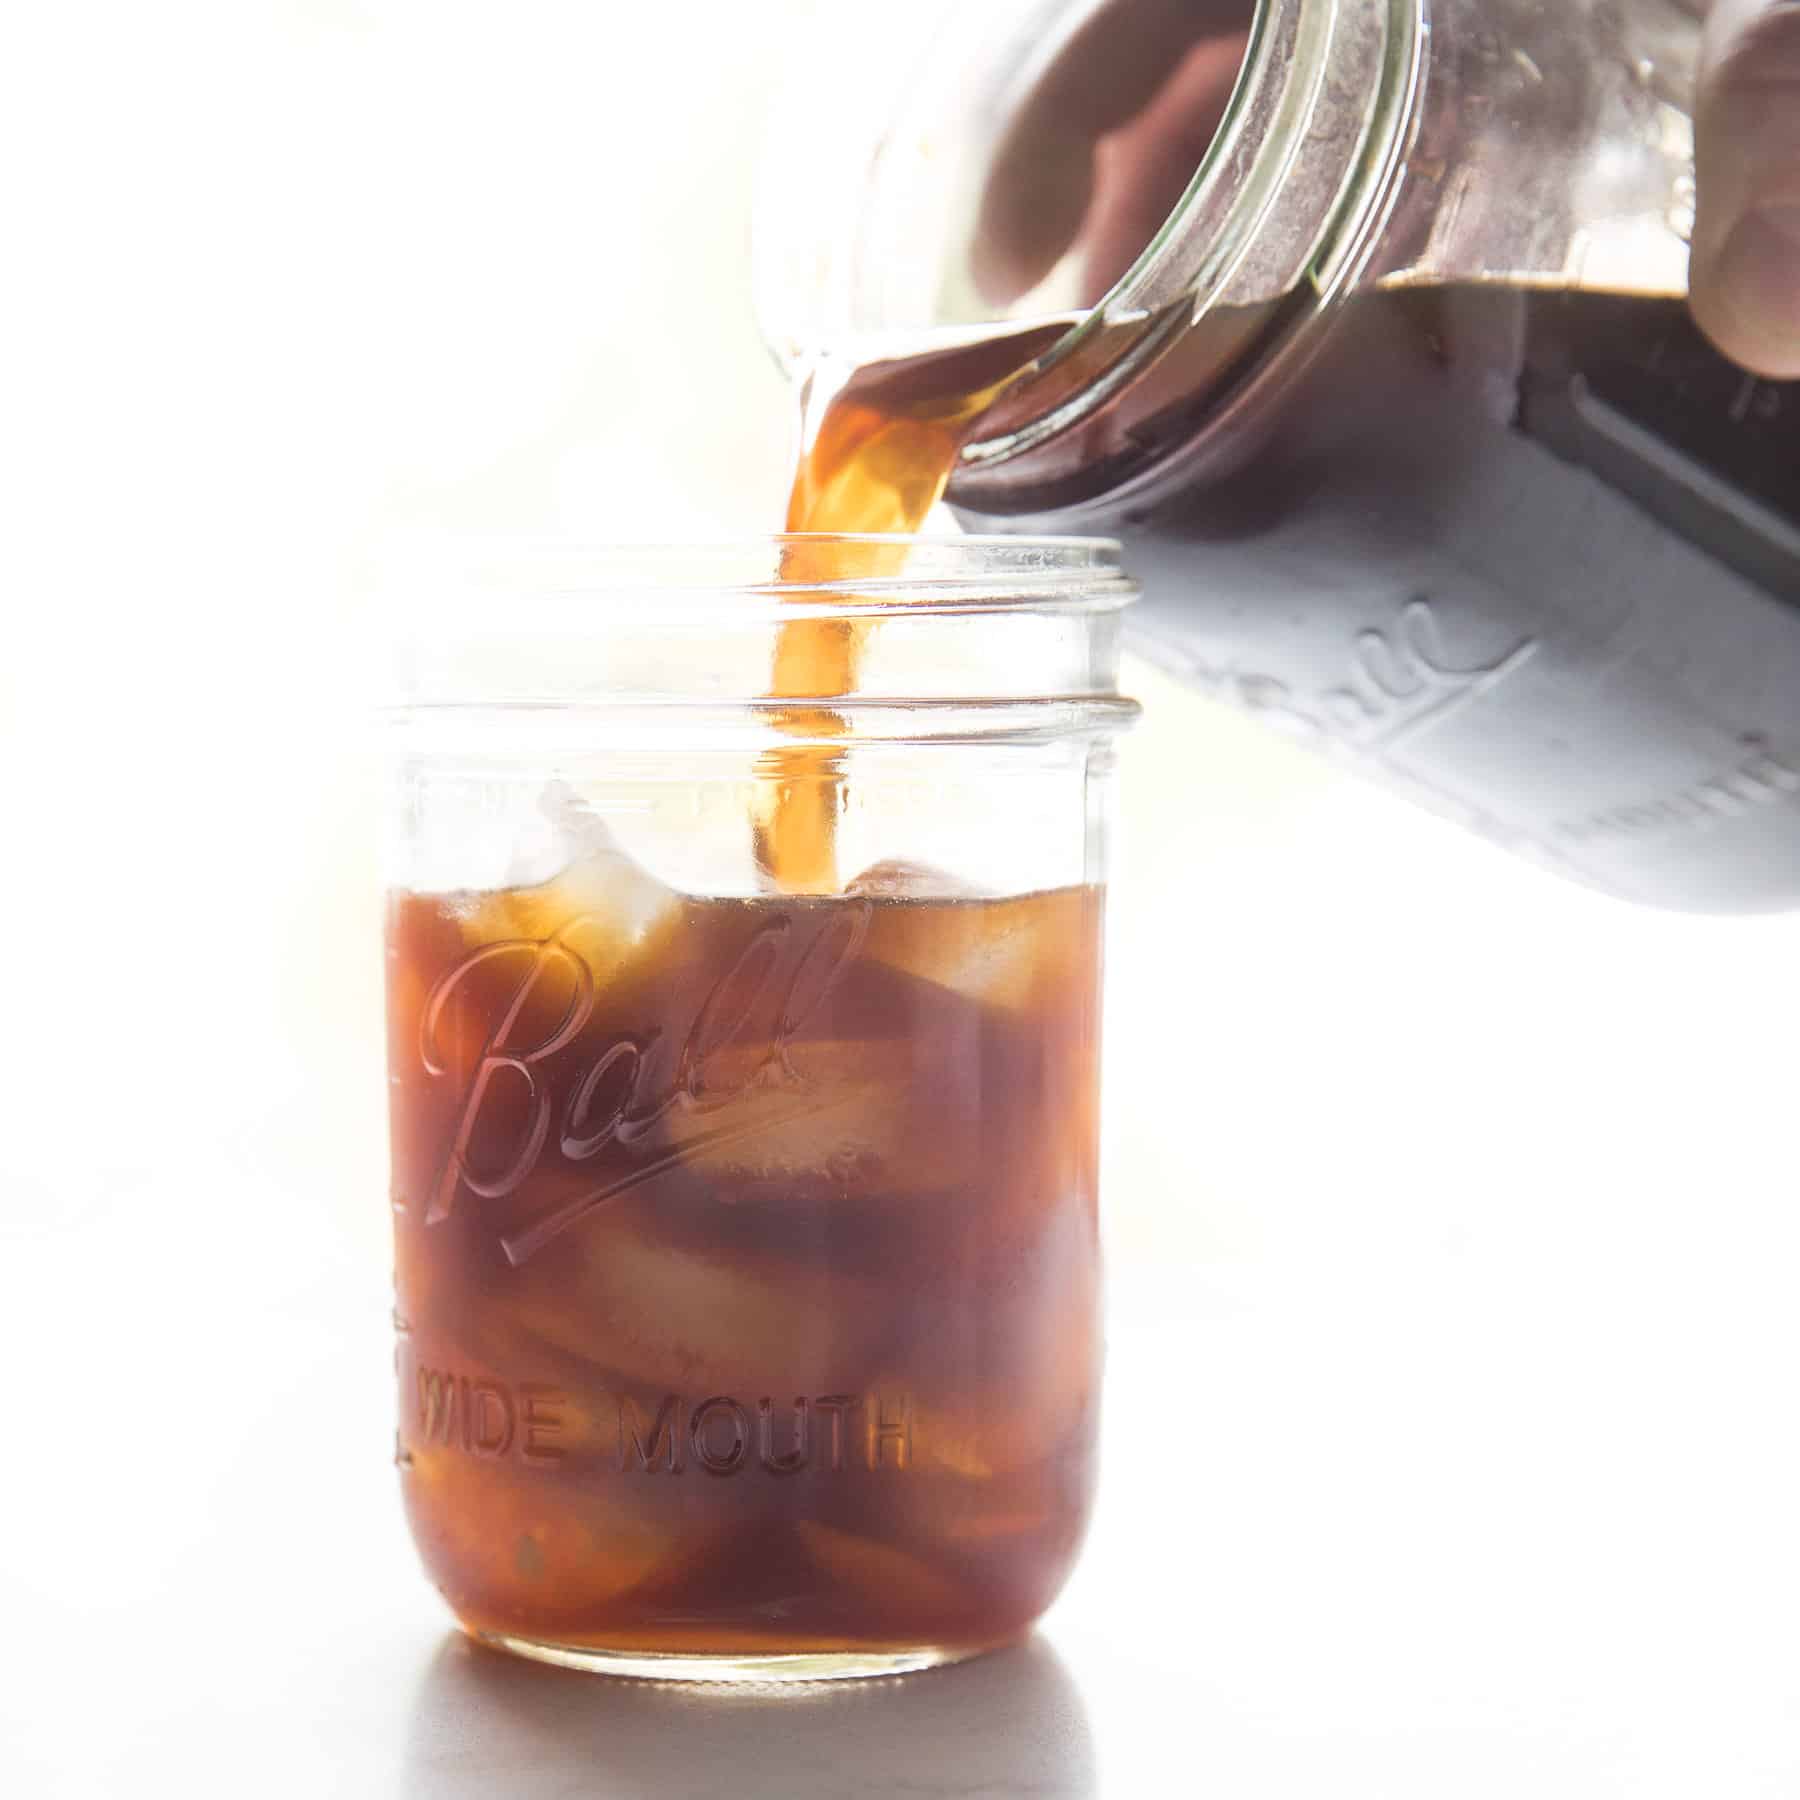 https://www.tasteslovely.com/wp-content/uploads/3000/03/How-To-Make-Cold-Brew-Coffee-In-A-Mason-Jar-tasteslovely.com_.jpg